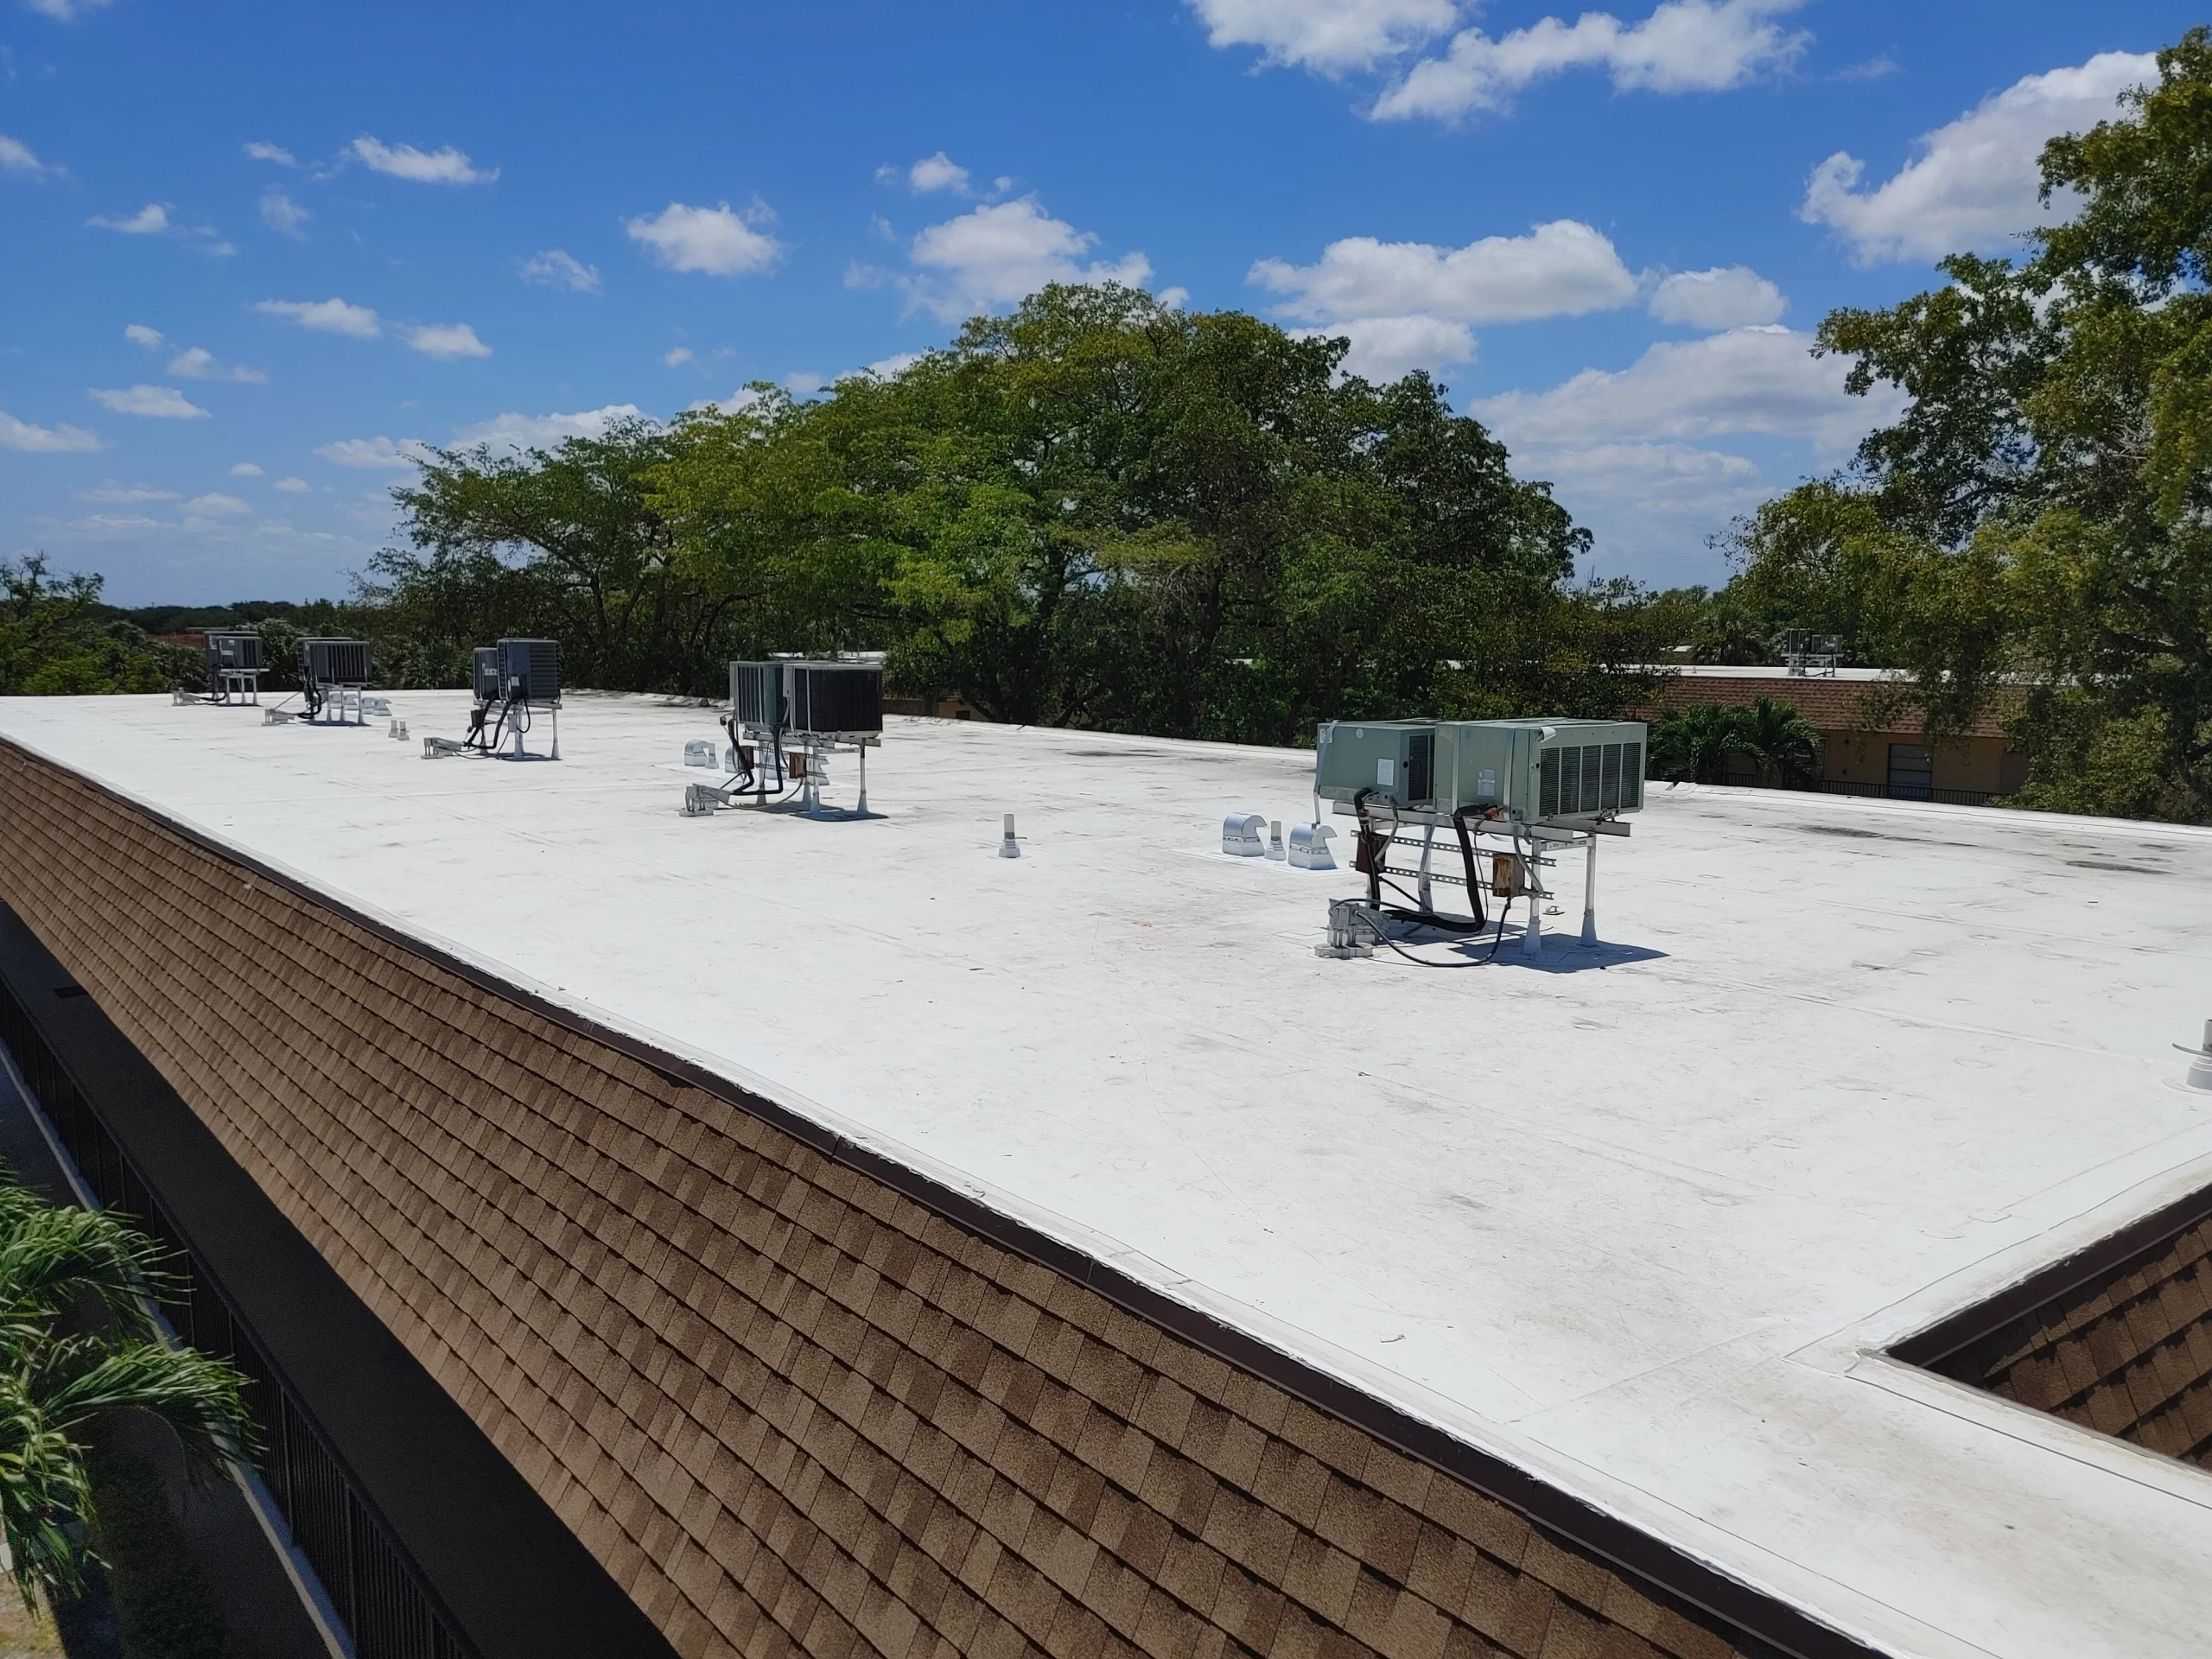 A completed flat roof with a reflective white coating, typically used for energy efficiency and extending the roof life on commercial buildings.